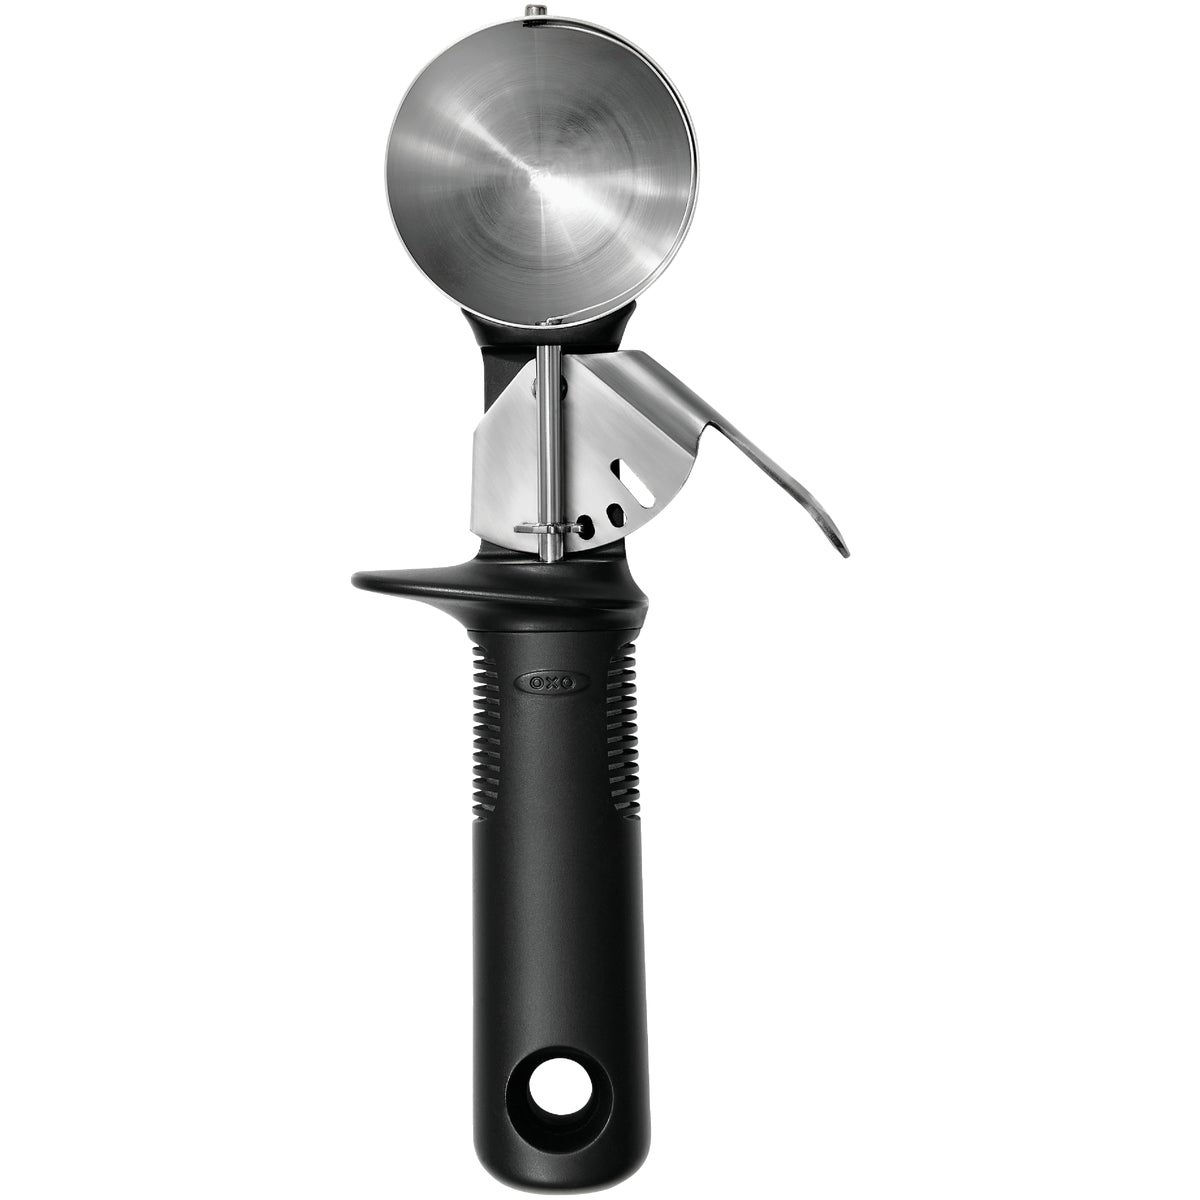 Oxo Stainless Steel Ice Cream Spade : Target